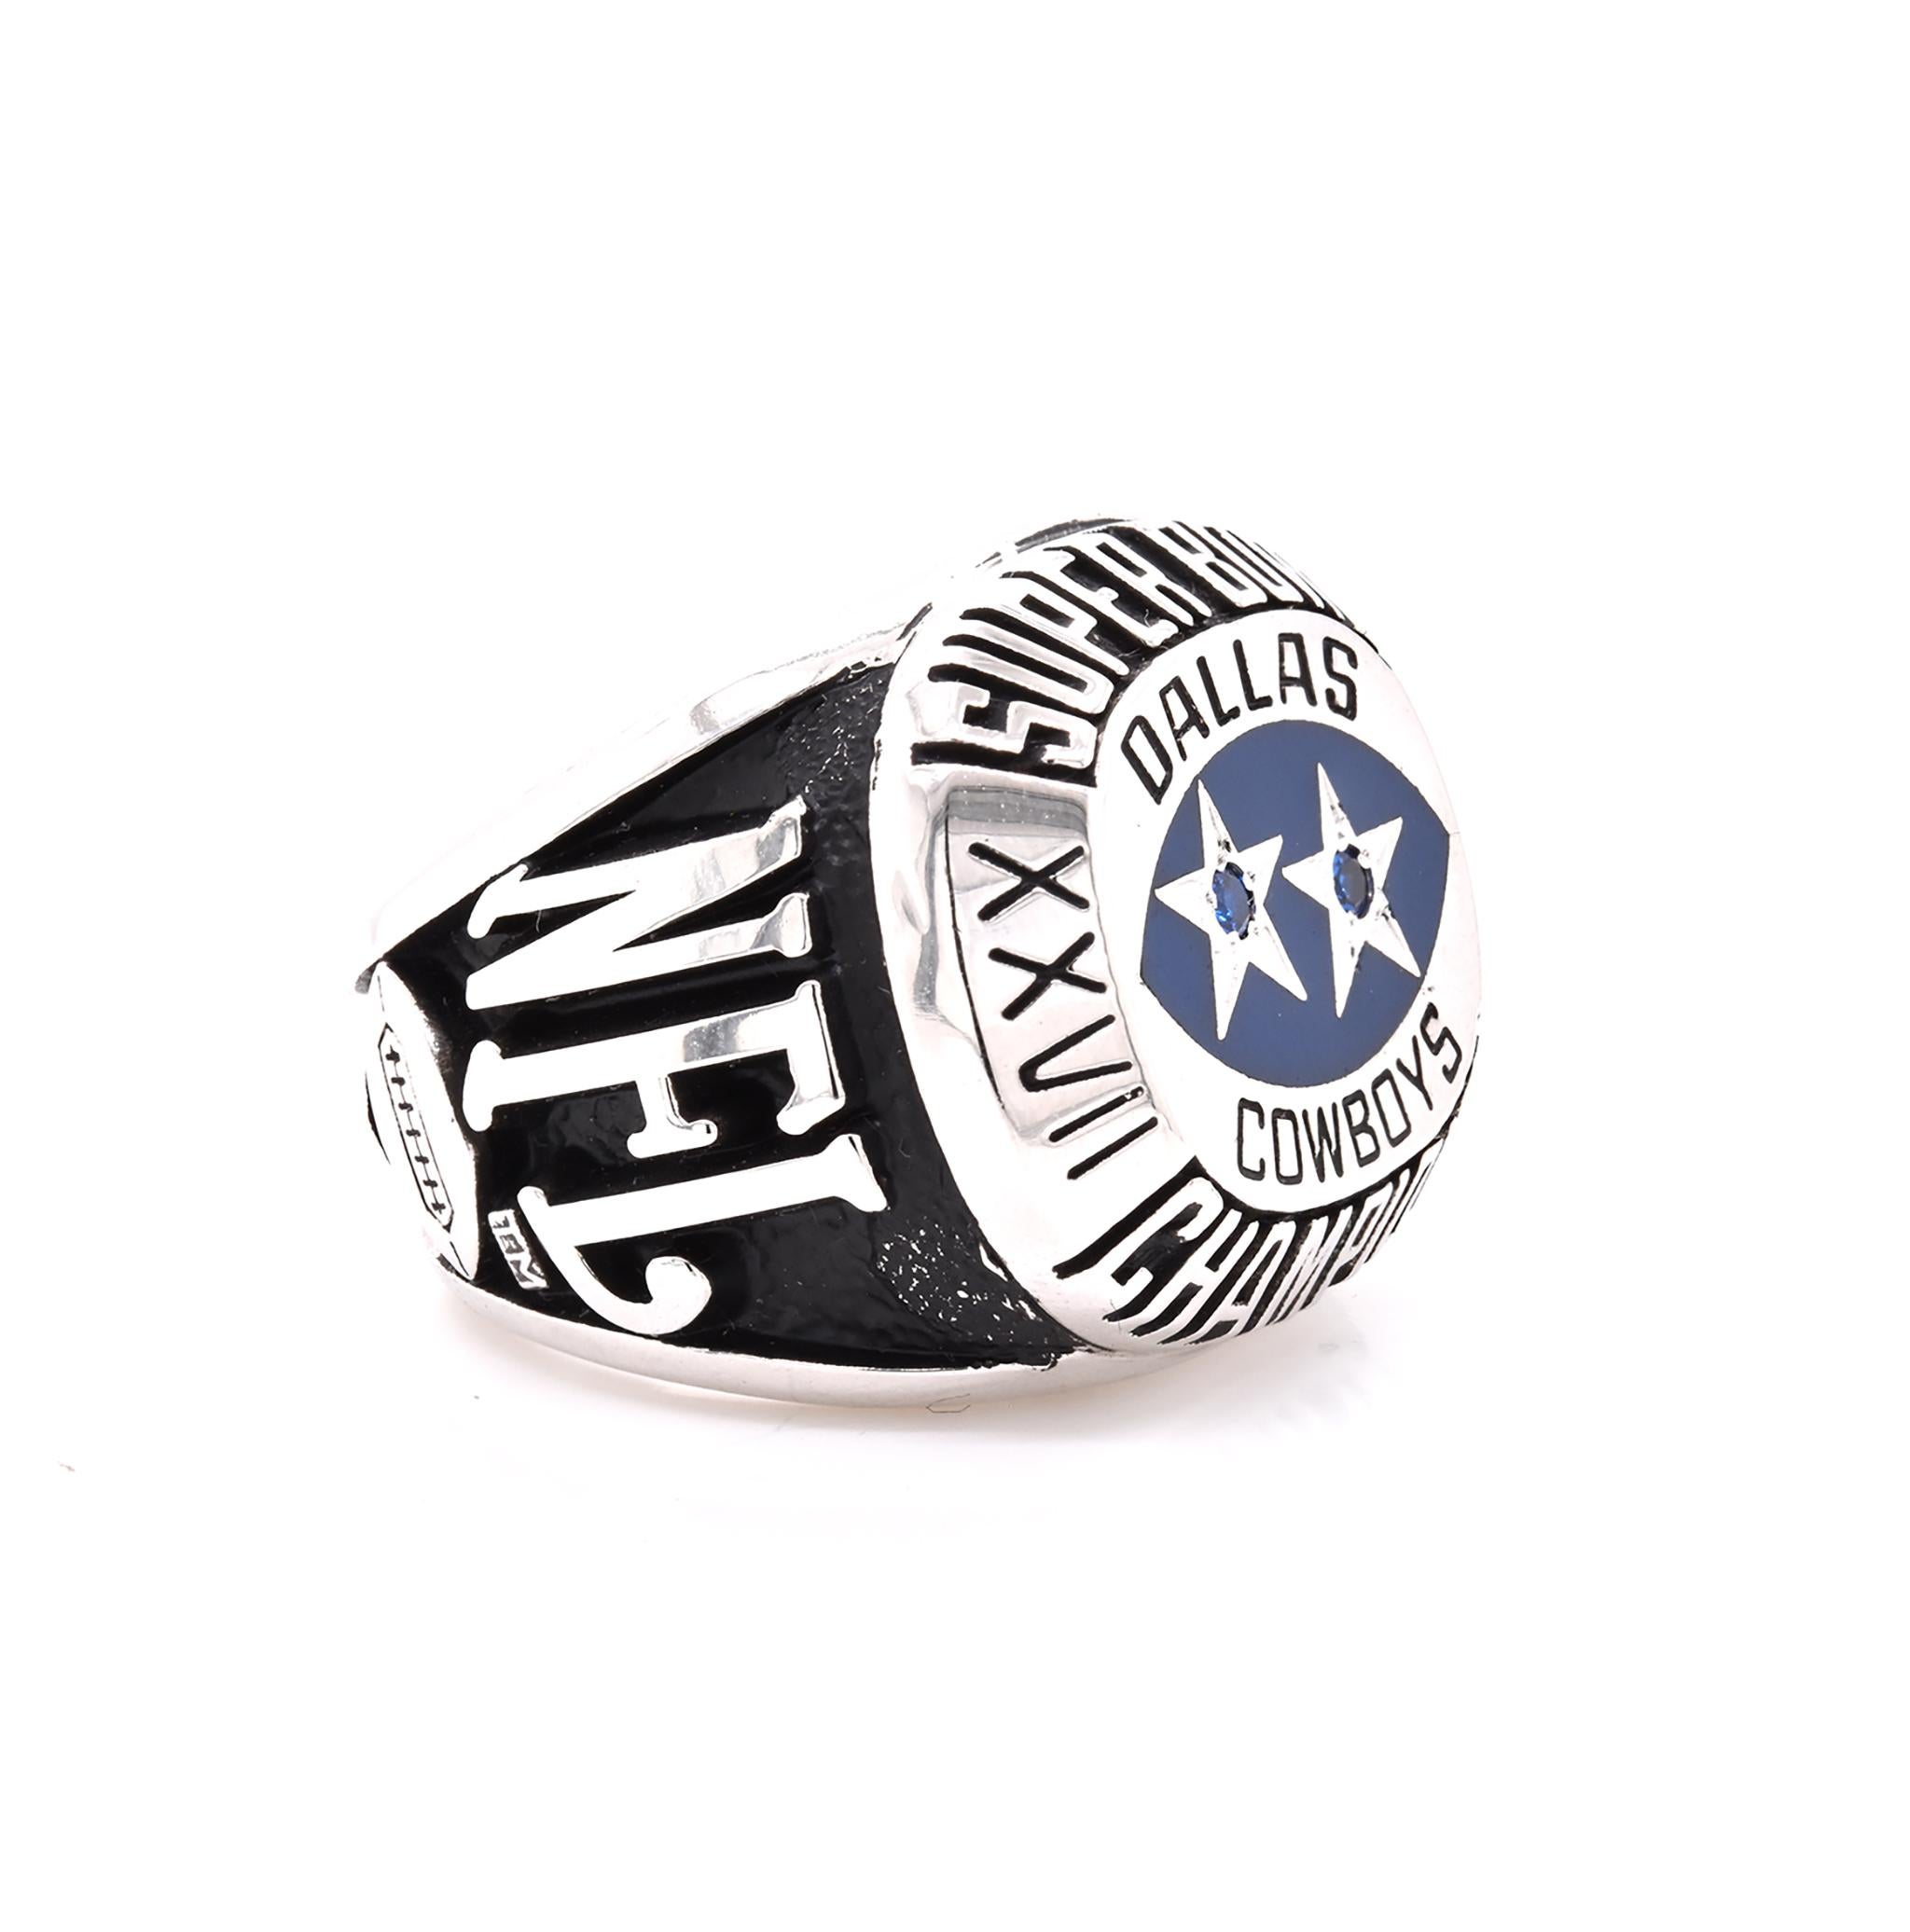 Designer: Dallas Cowboys
Material: sterling silver
Dimensions: ring measures 21.7mm wide
Serial #: 2466 / 5000
Weight: 38.44 grams
